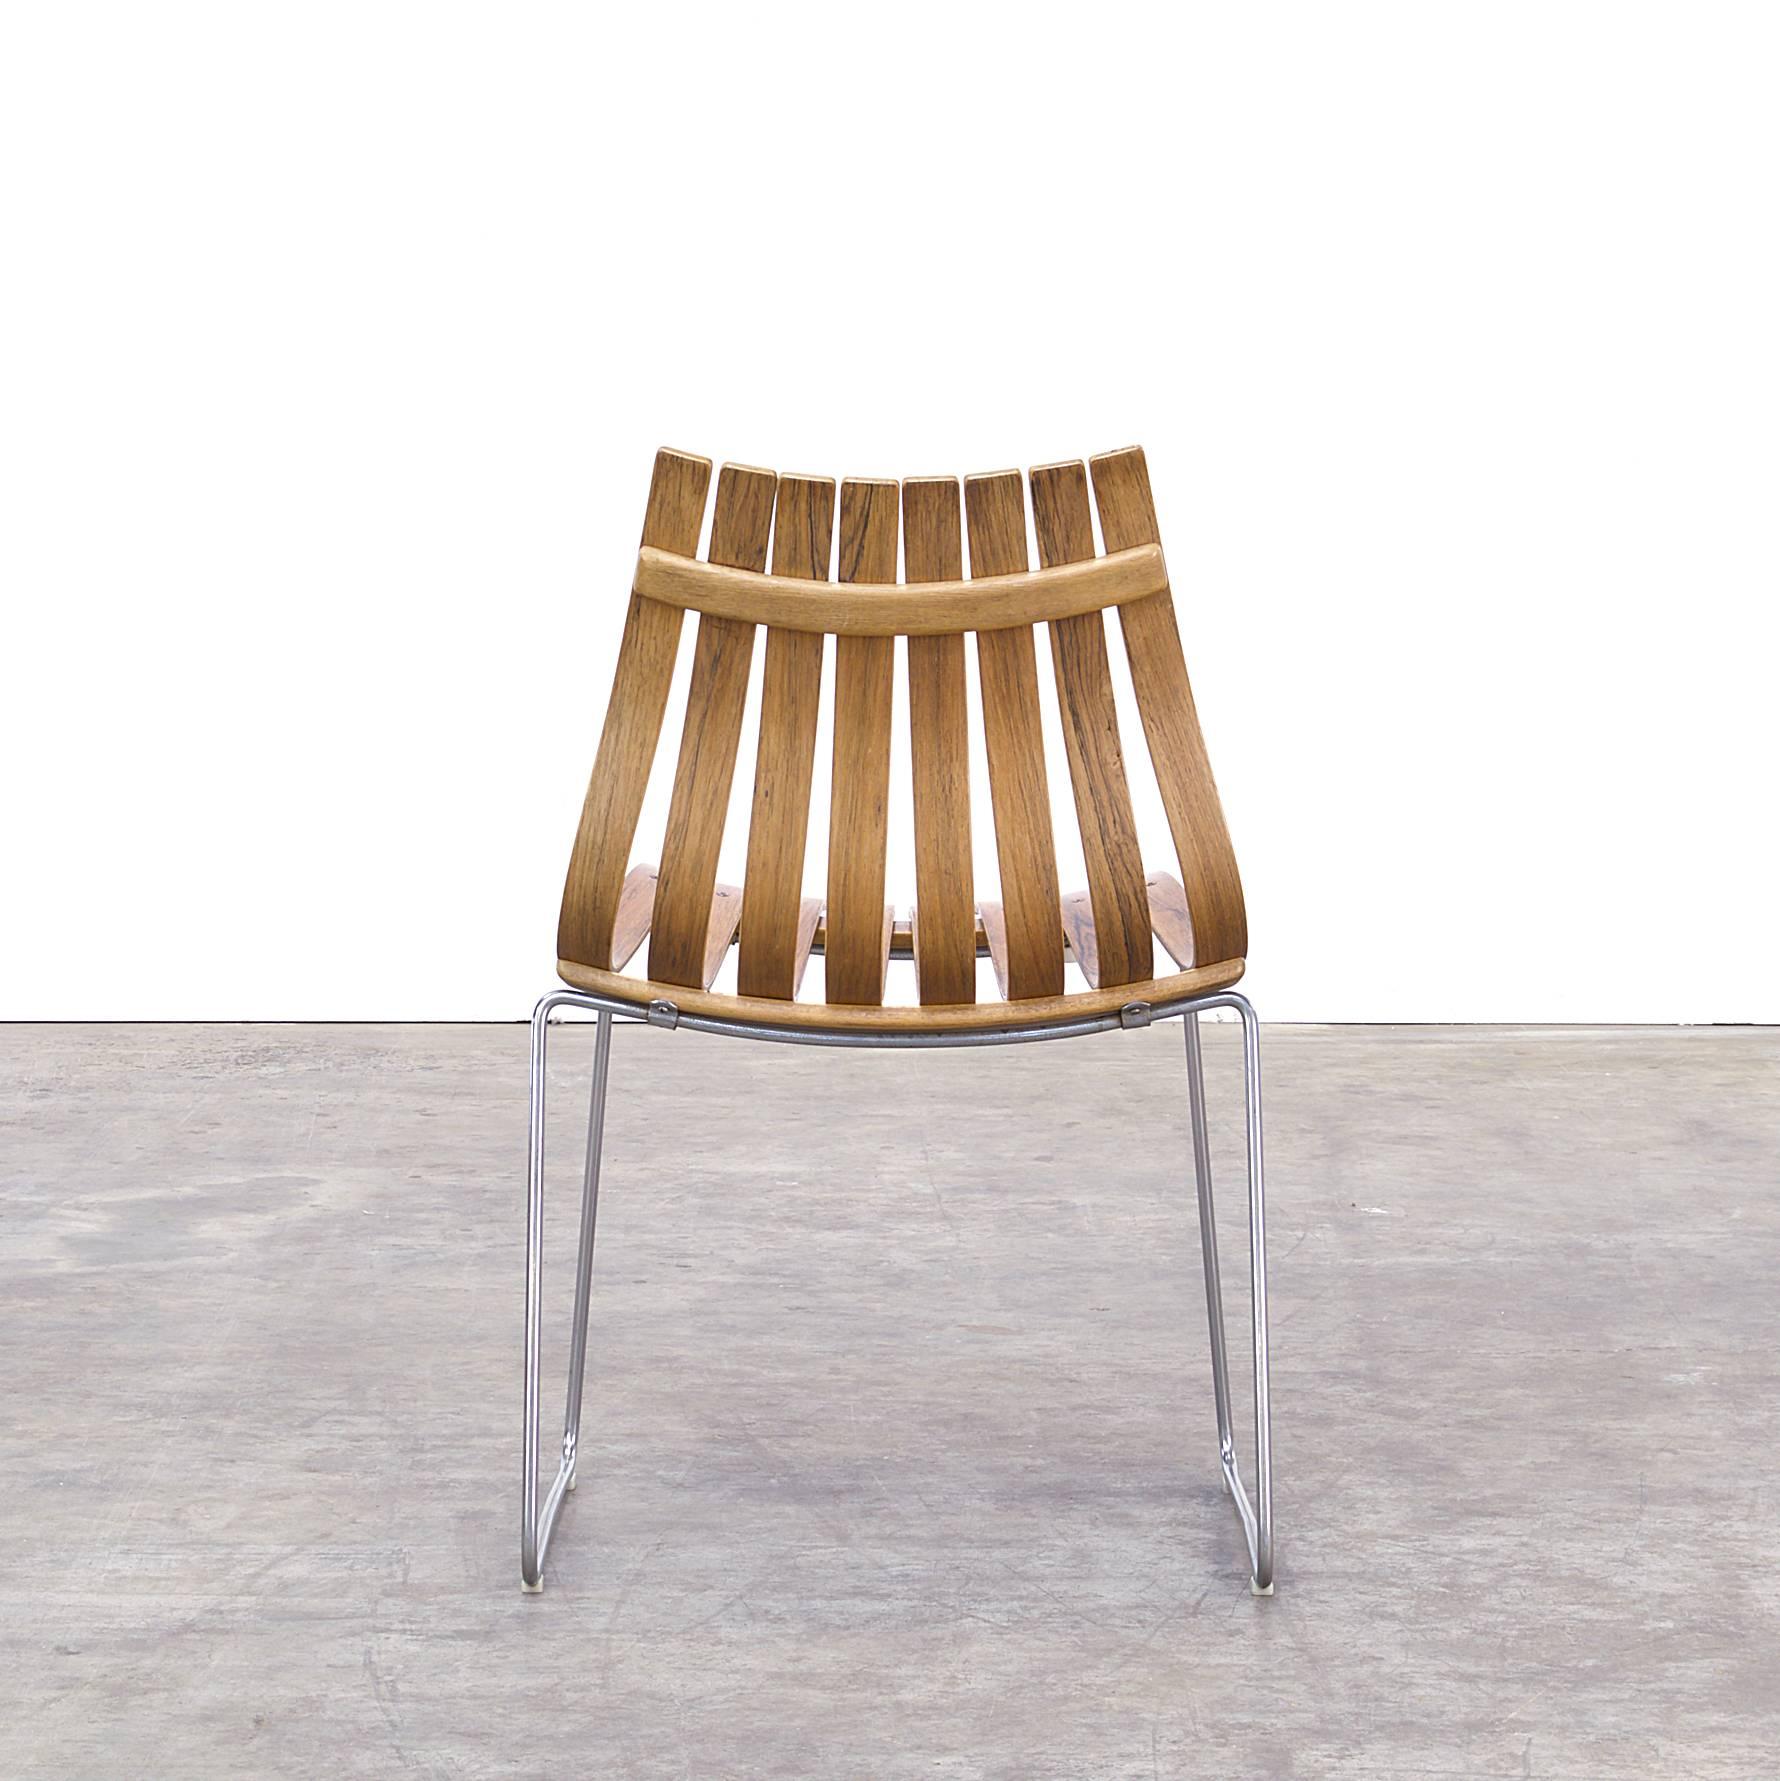 1950s Hans Brattrud ‘Scandia’ Chair Group of Four for Hove Möble For Sale 1